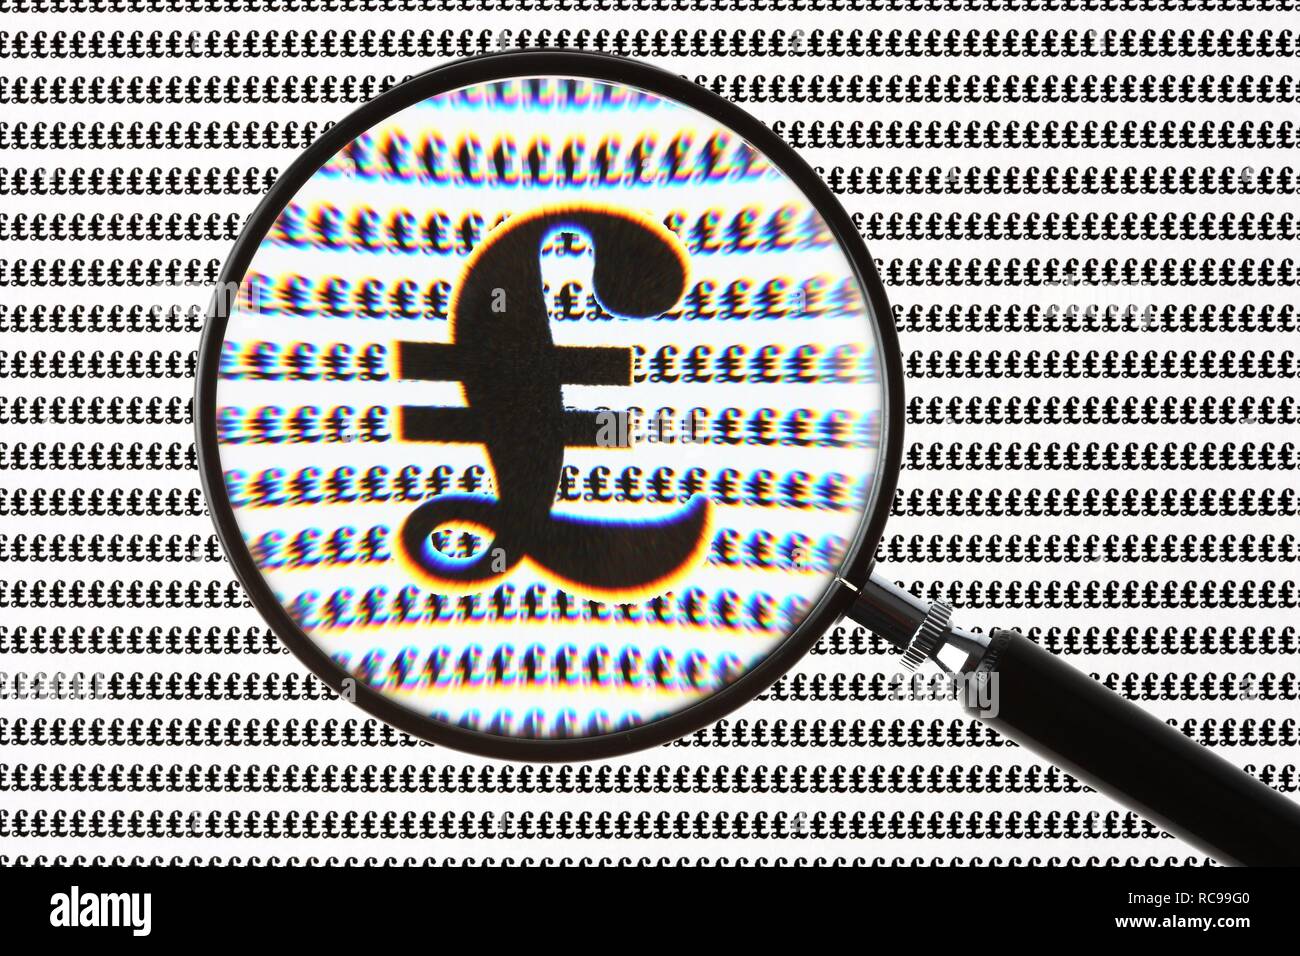 Pound symbol, currency symbol of the British pound, through a magnifying glass Stock Photo